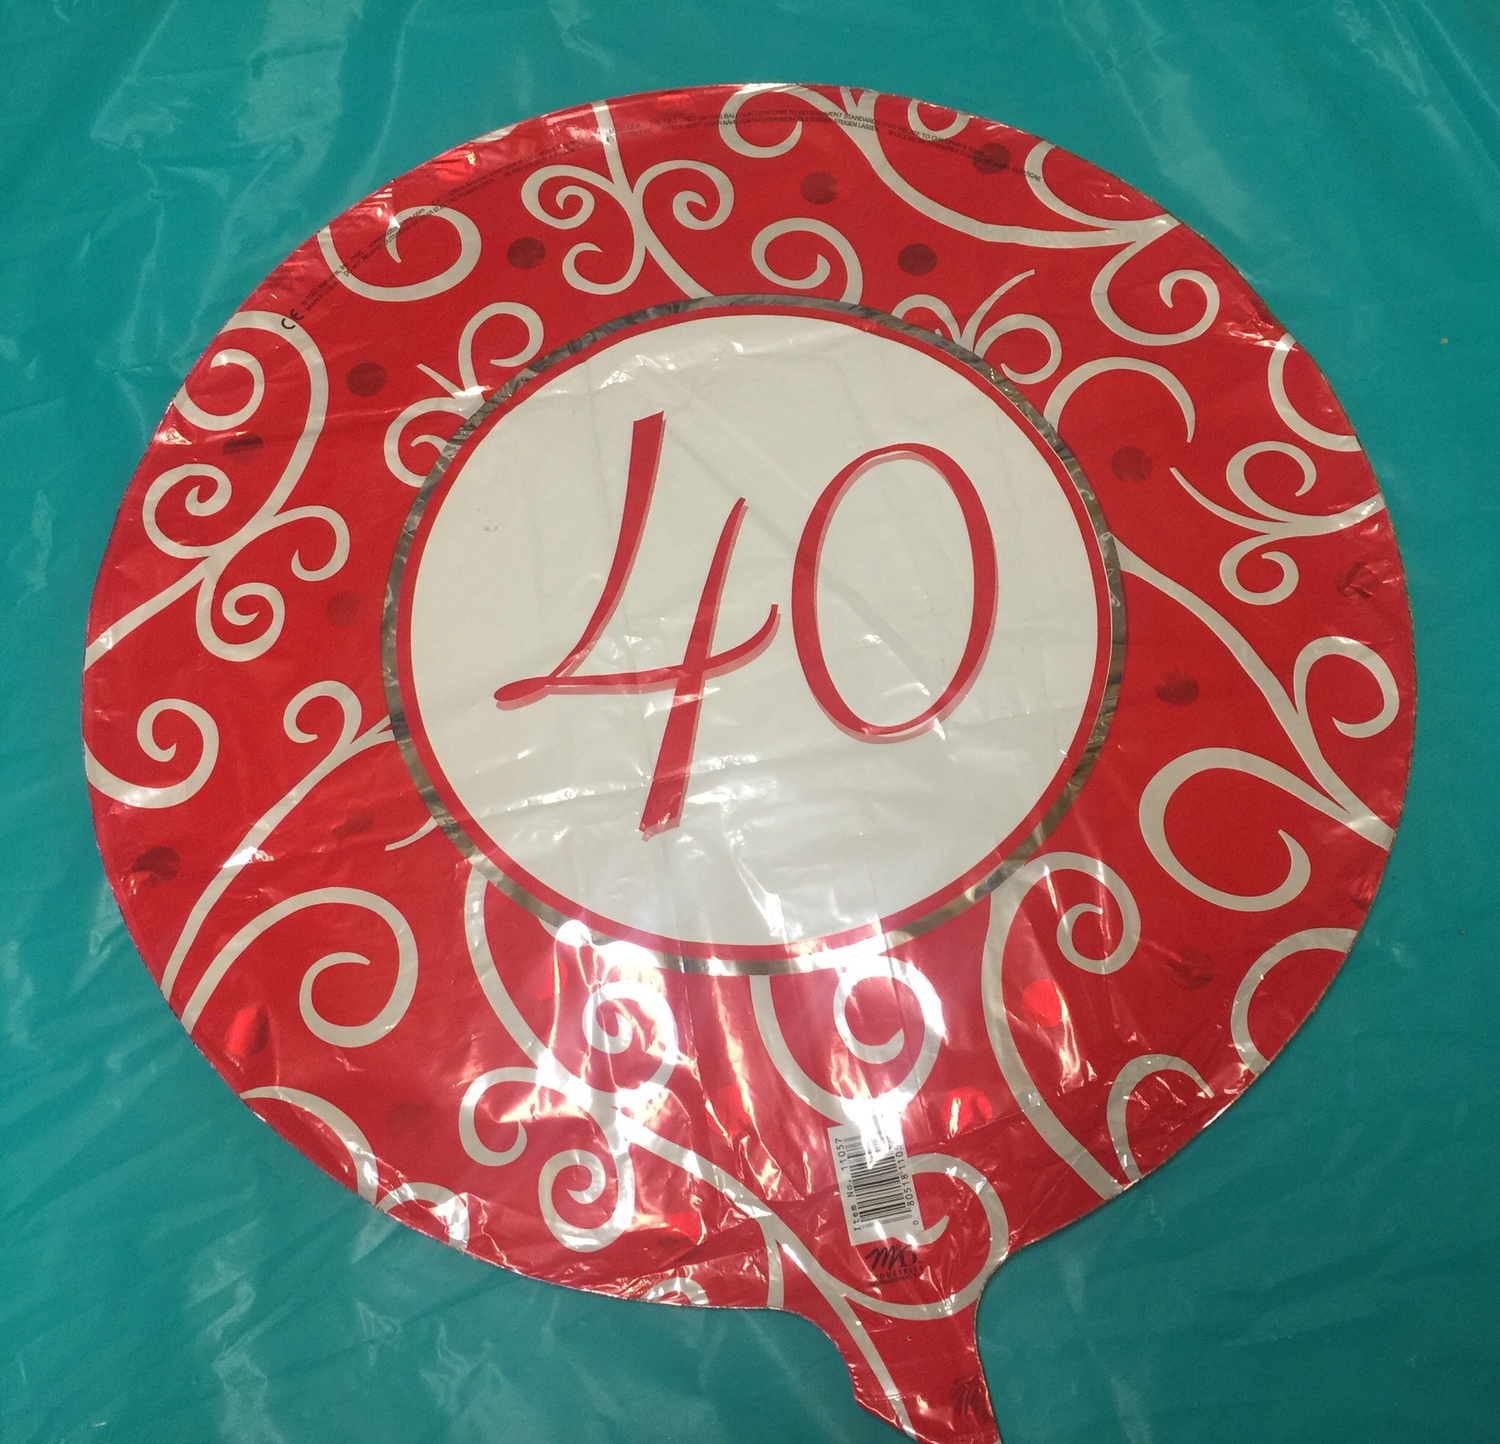 Numbered 40 balloon